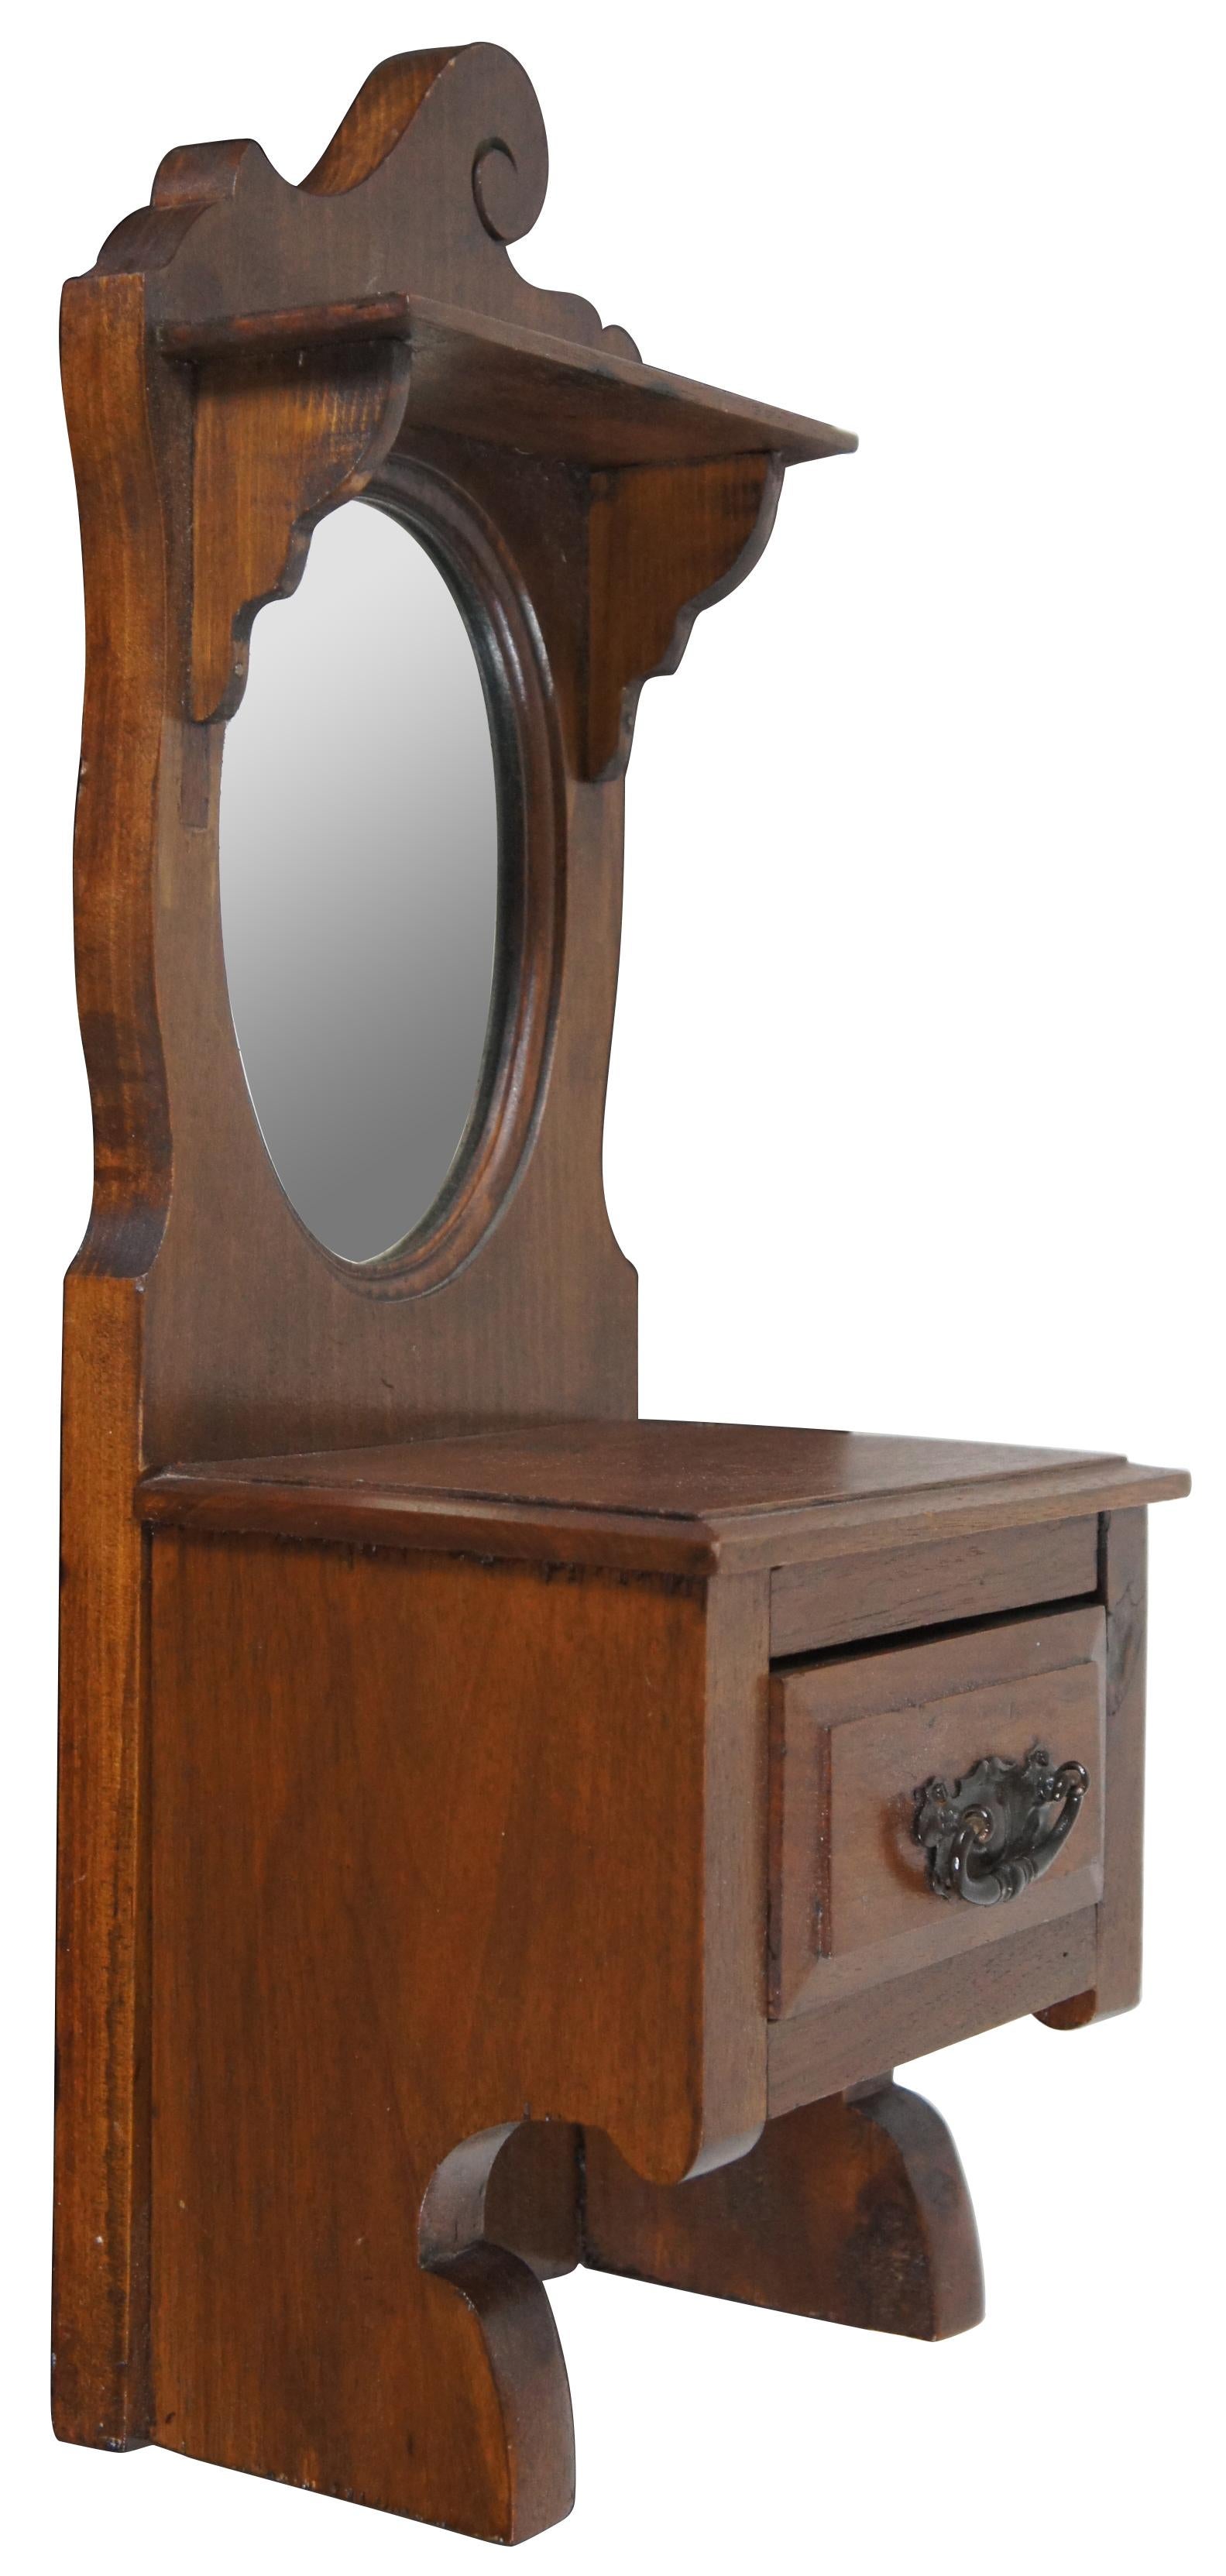 Antique French wall hanging shaving stand. Made from walnut with two shelves, oval mirror, and one drawer.
 